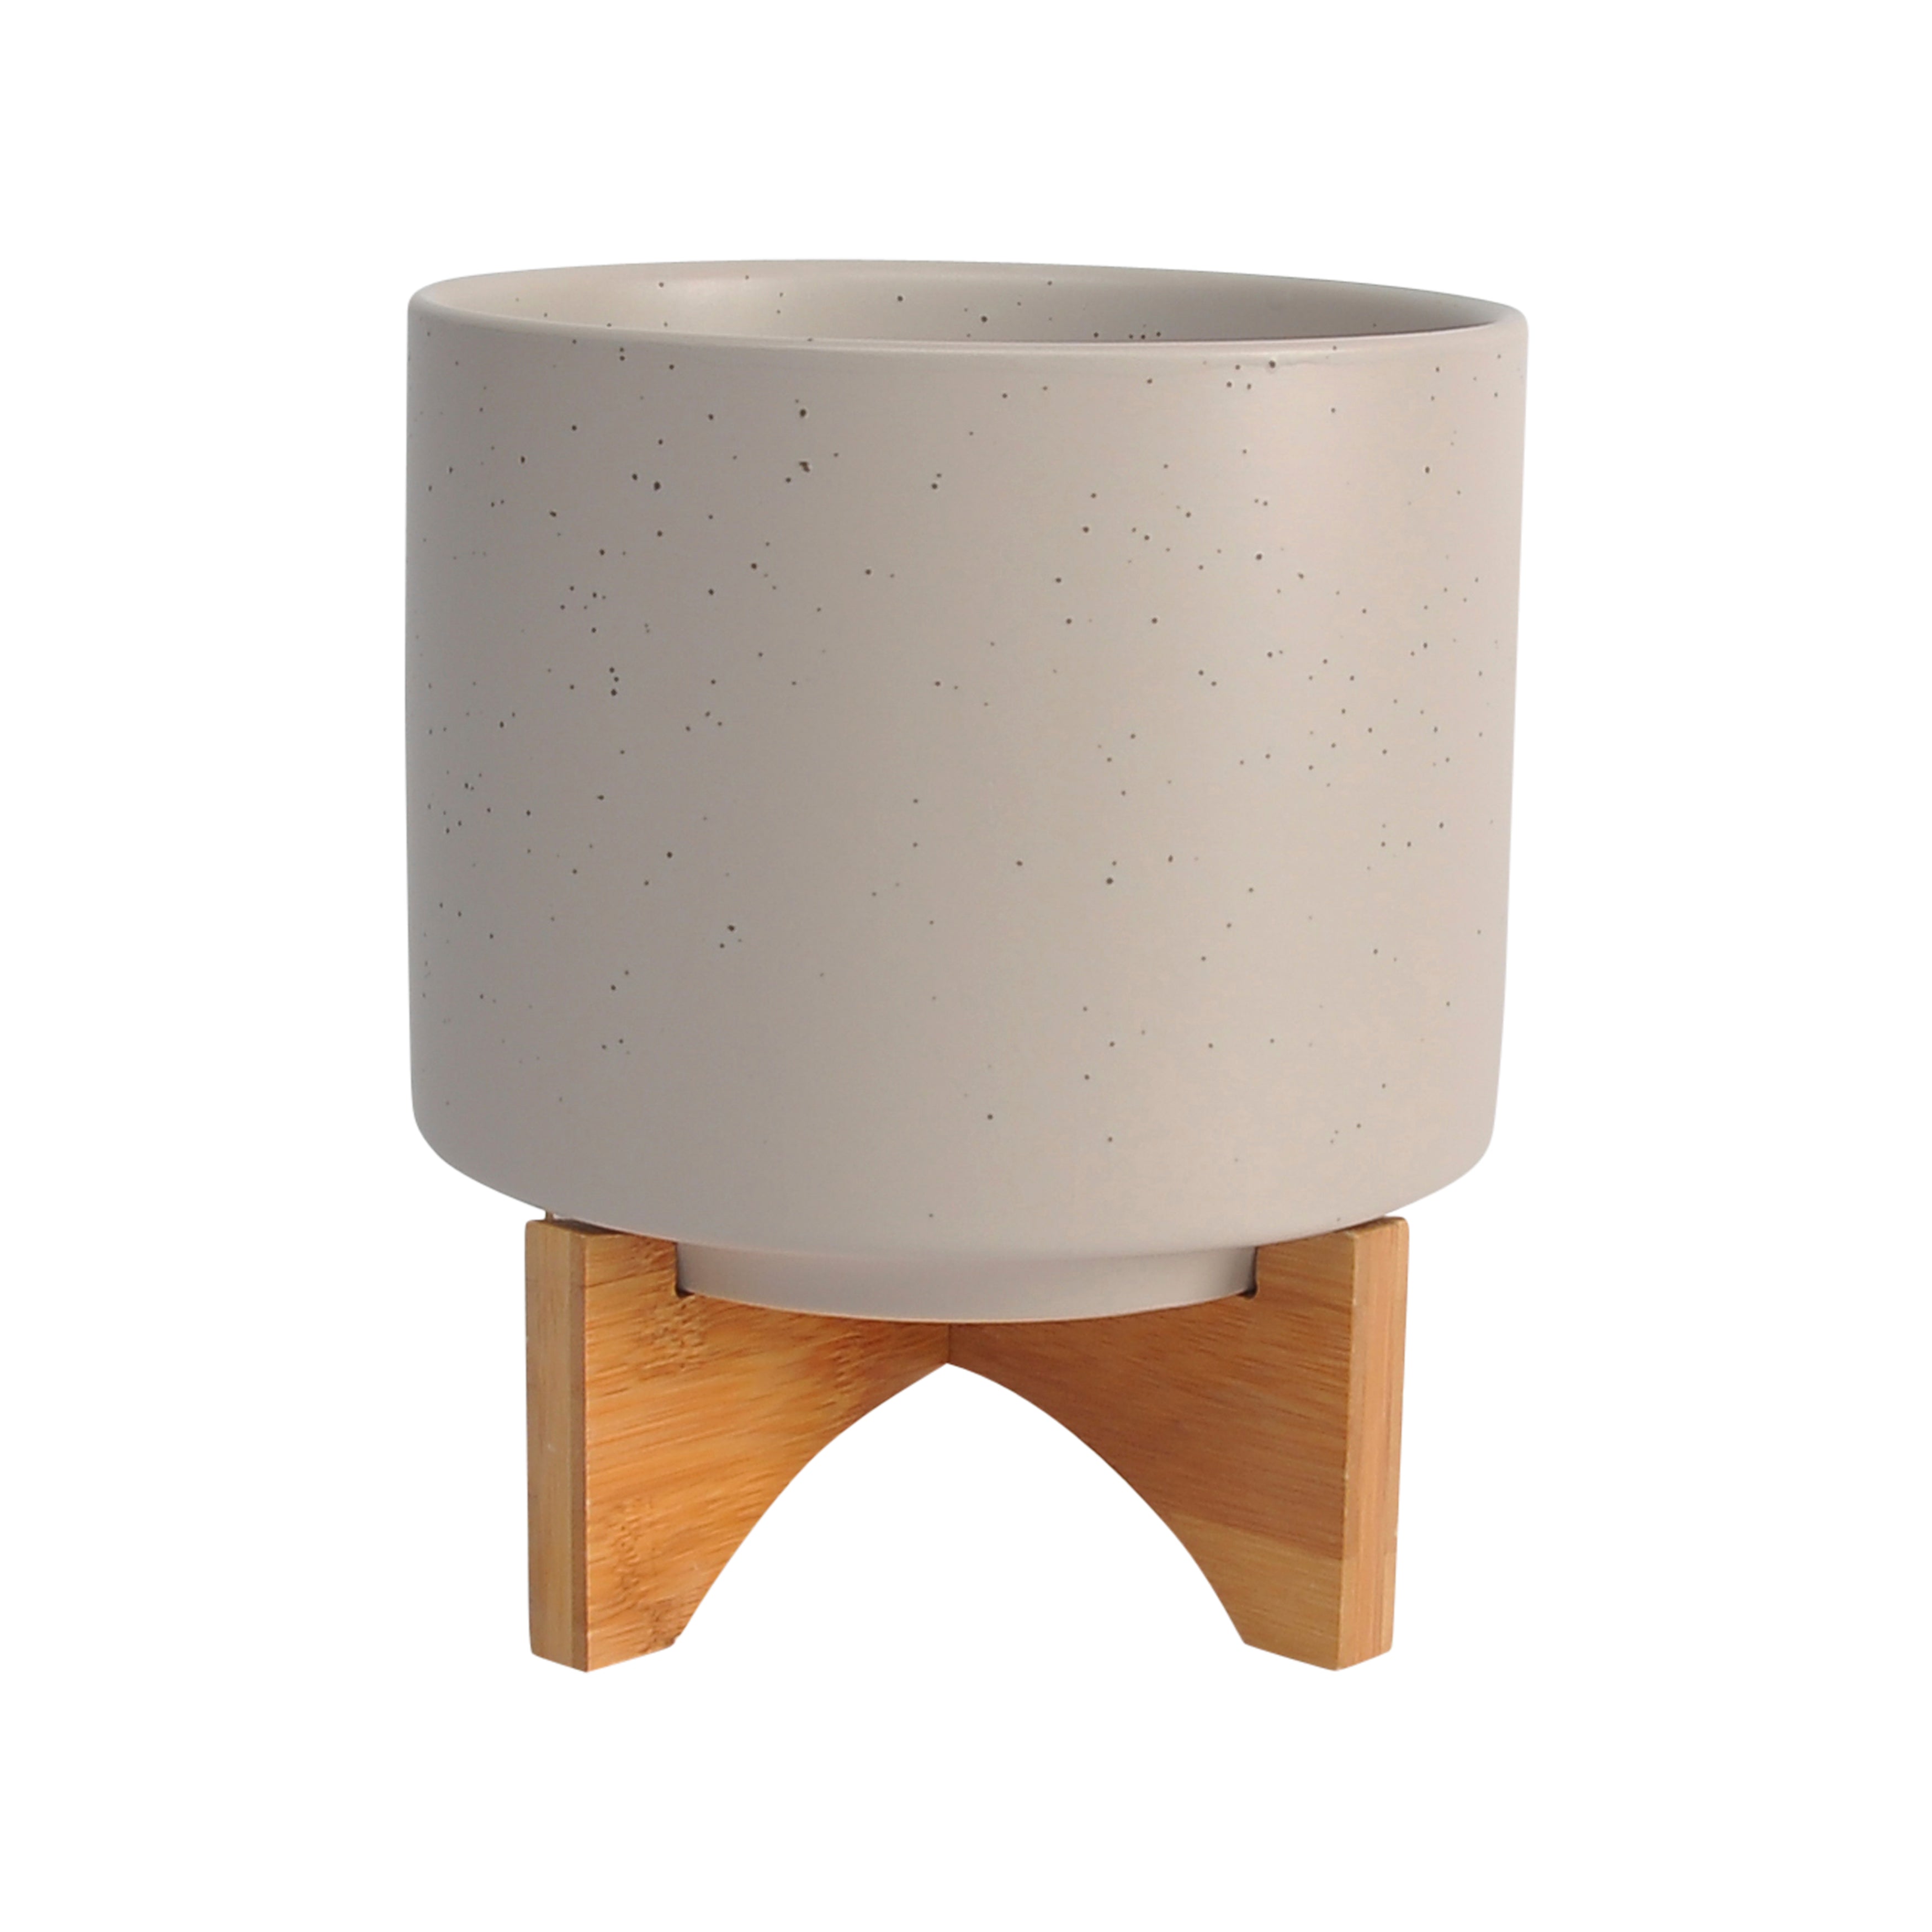 8" Planter with Wood Stand, Matte Beige, Planters